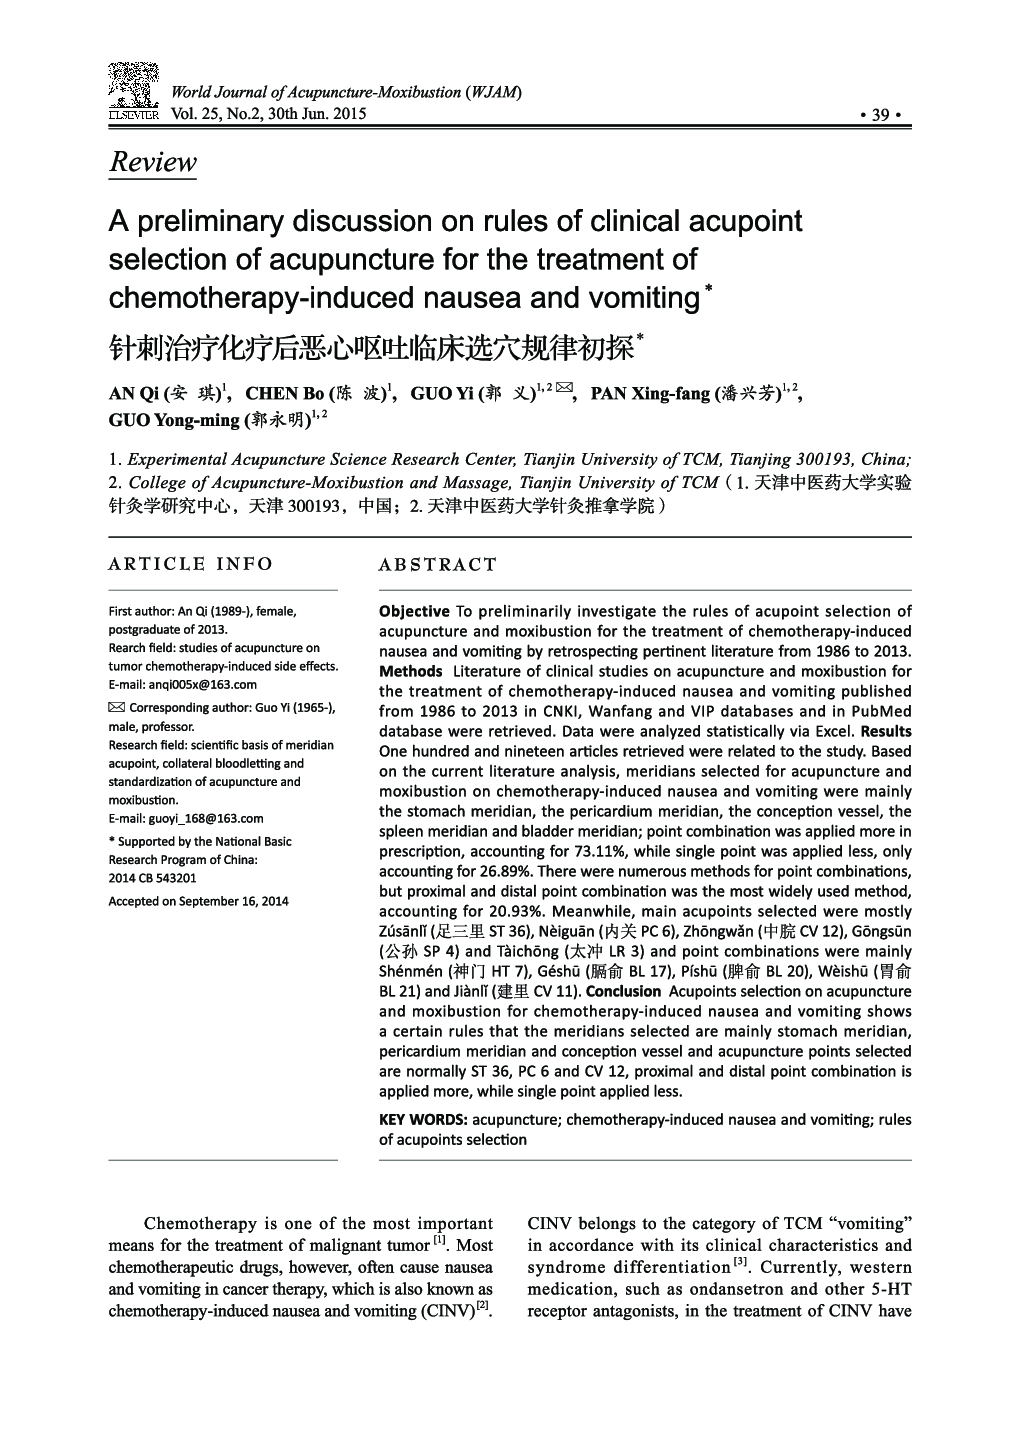 A preliminary discussion on rules of clinical acupoint selection of acupuncture for the treatment of chemotherapy-induced nausea and vomiting